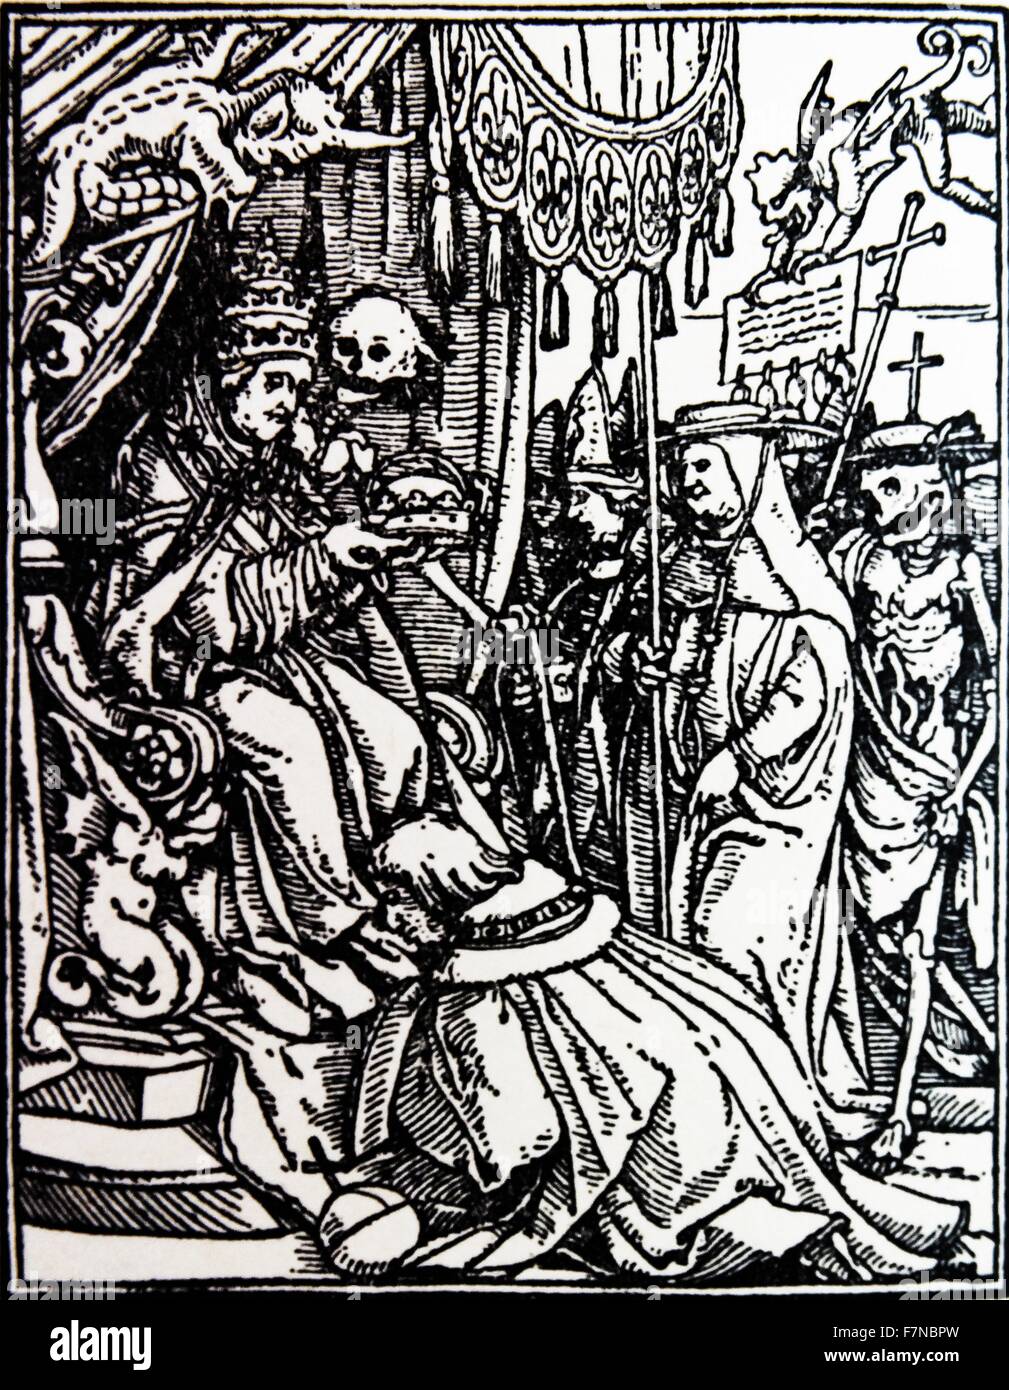 Hans holbein the younger: Totentanzfolge Series from a dance with death 1523 Stock Photo